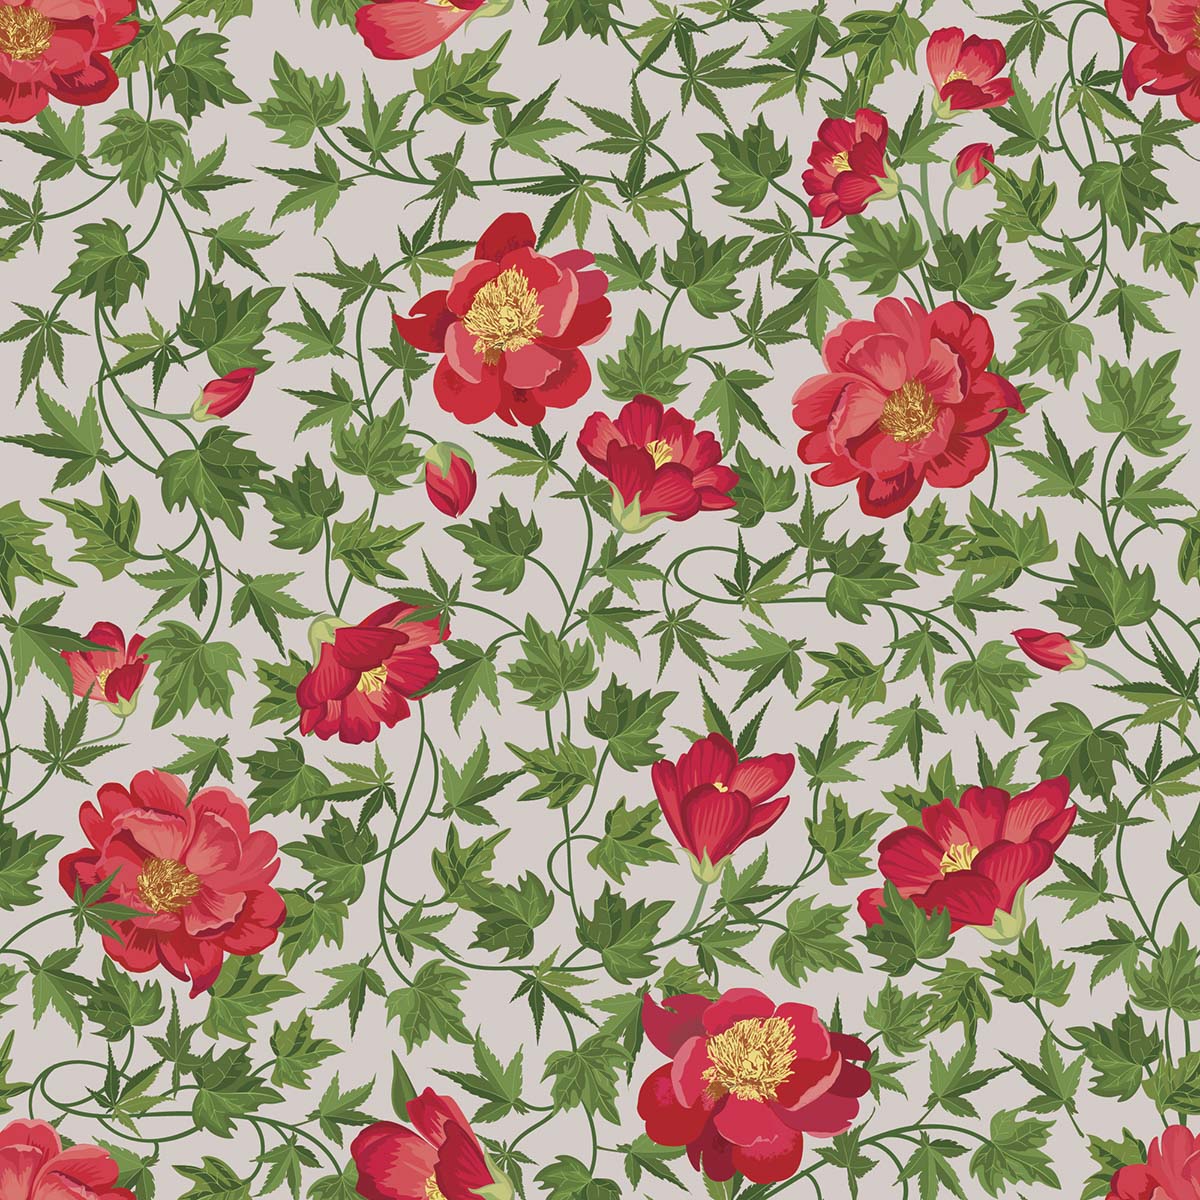 A pattern of red flowers and green leaves